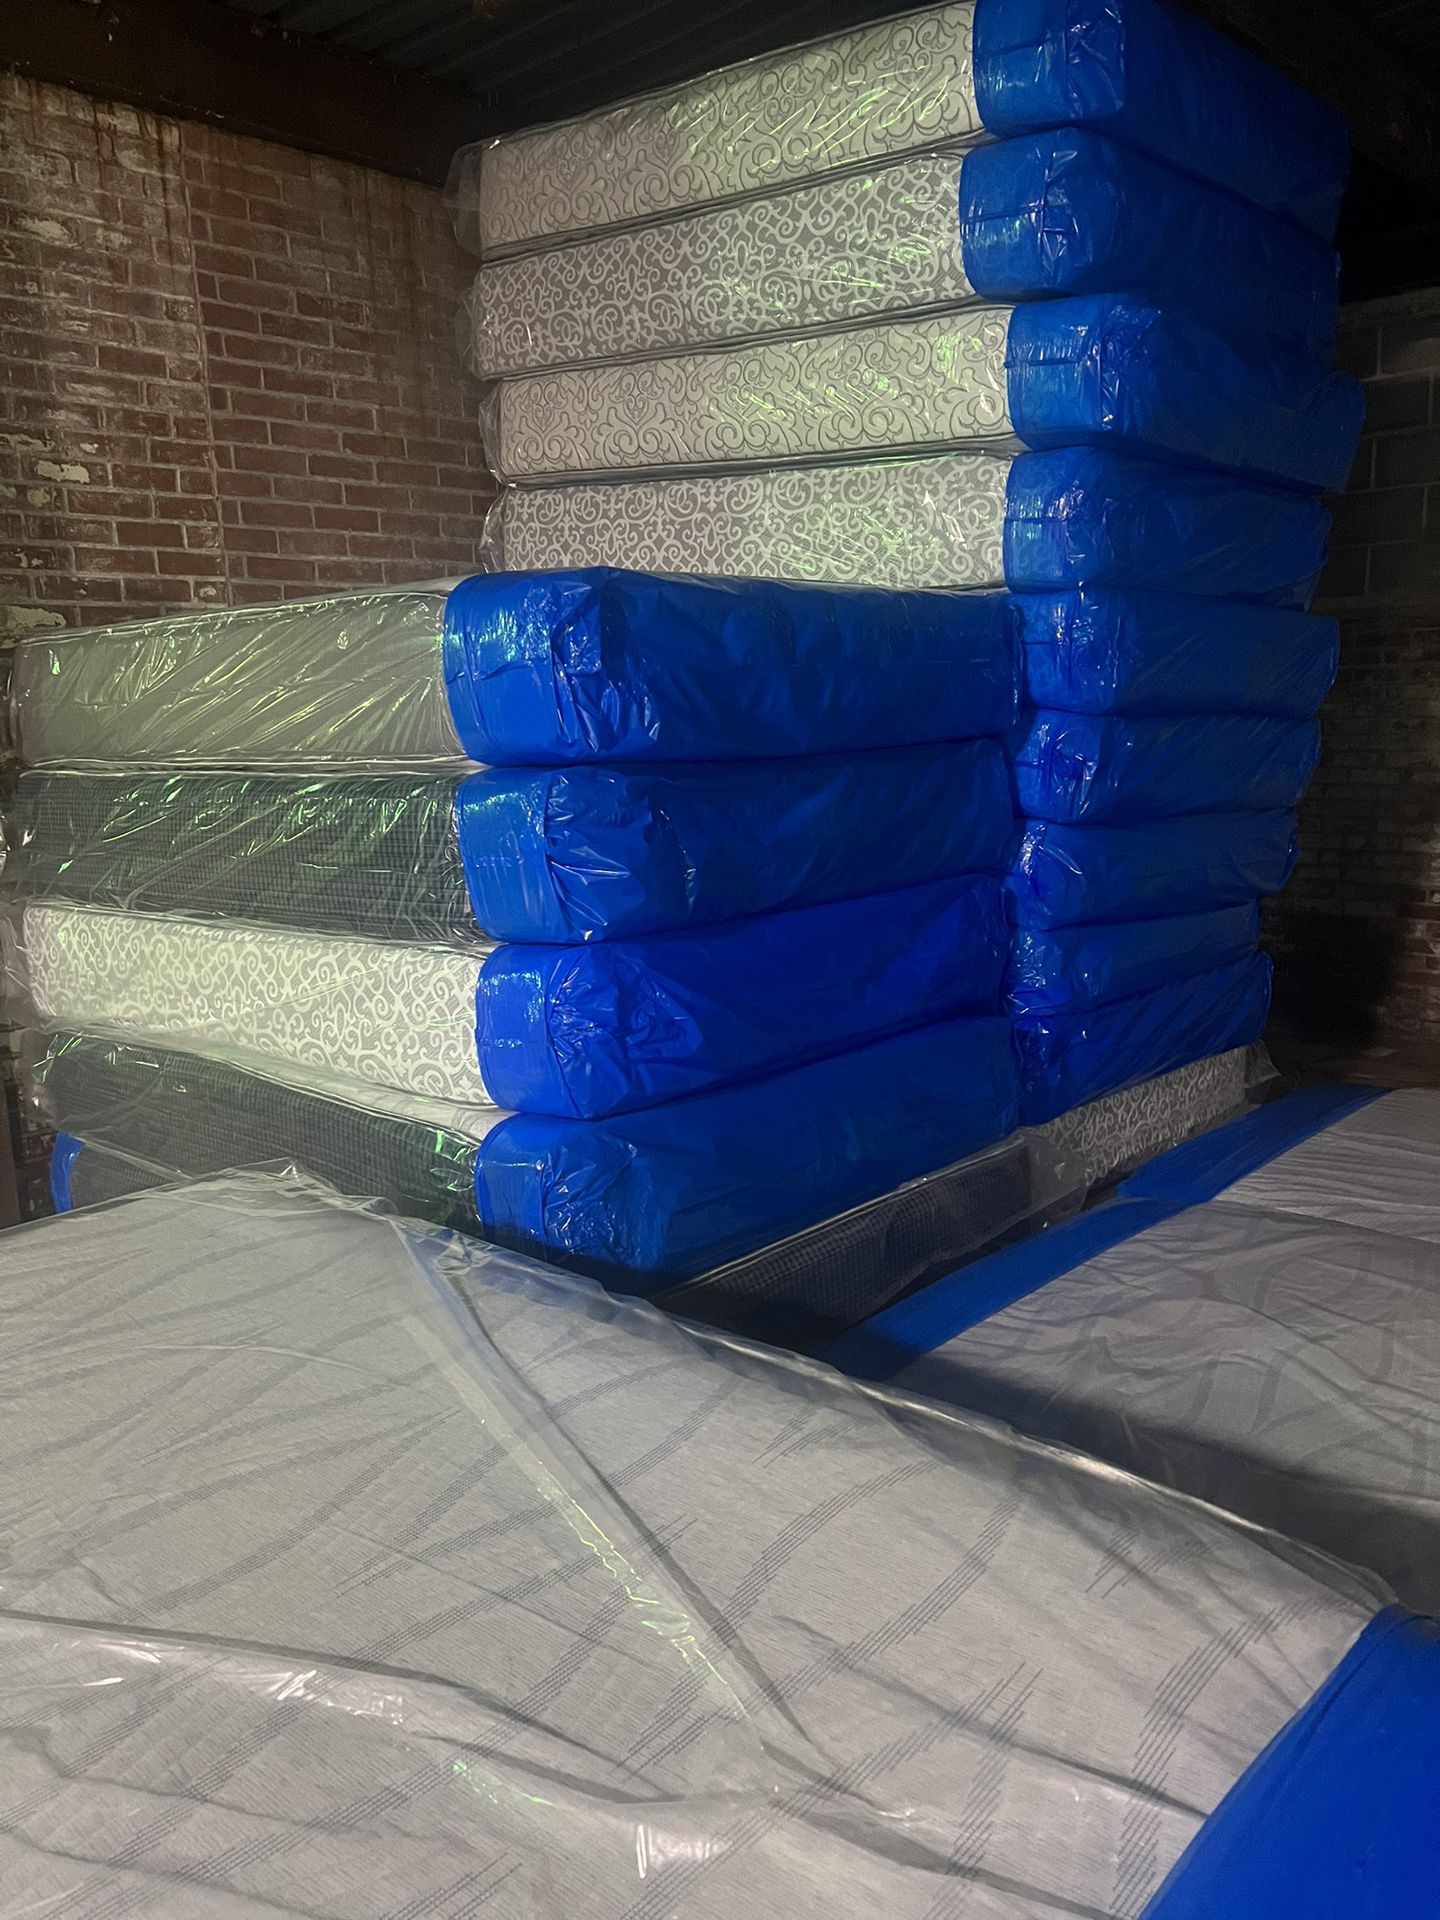 Bed Special. $199 New Posturepedic Posturepride Mattress Sets. Twin, Full Or Queen. Free Boxspring Included